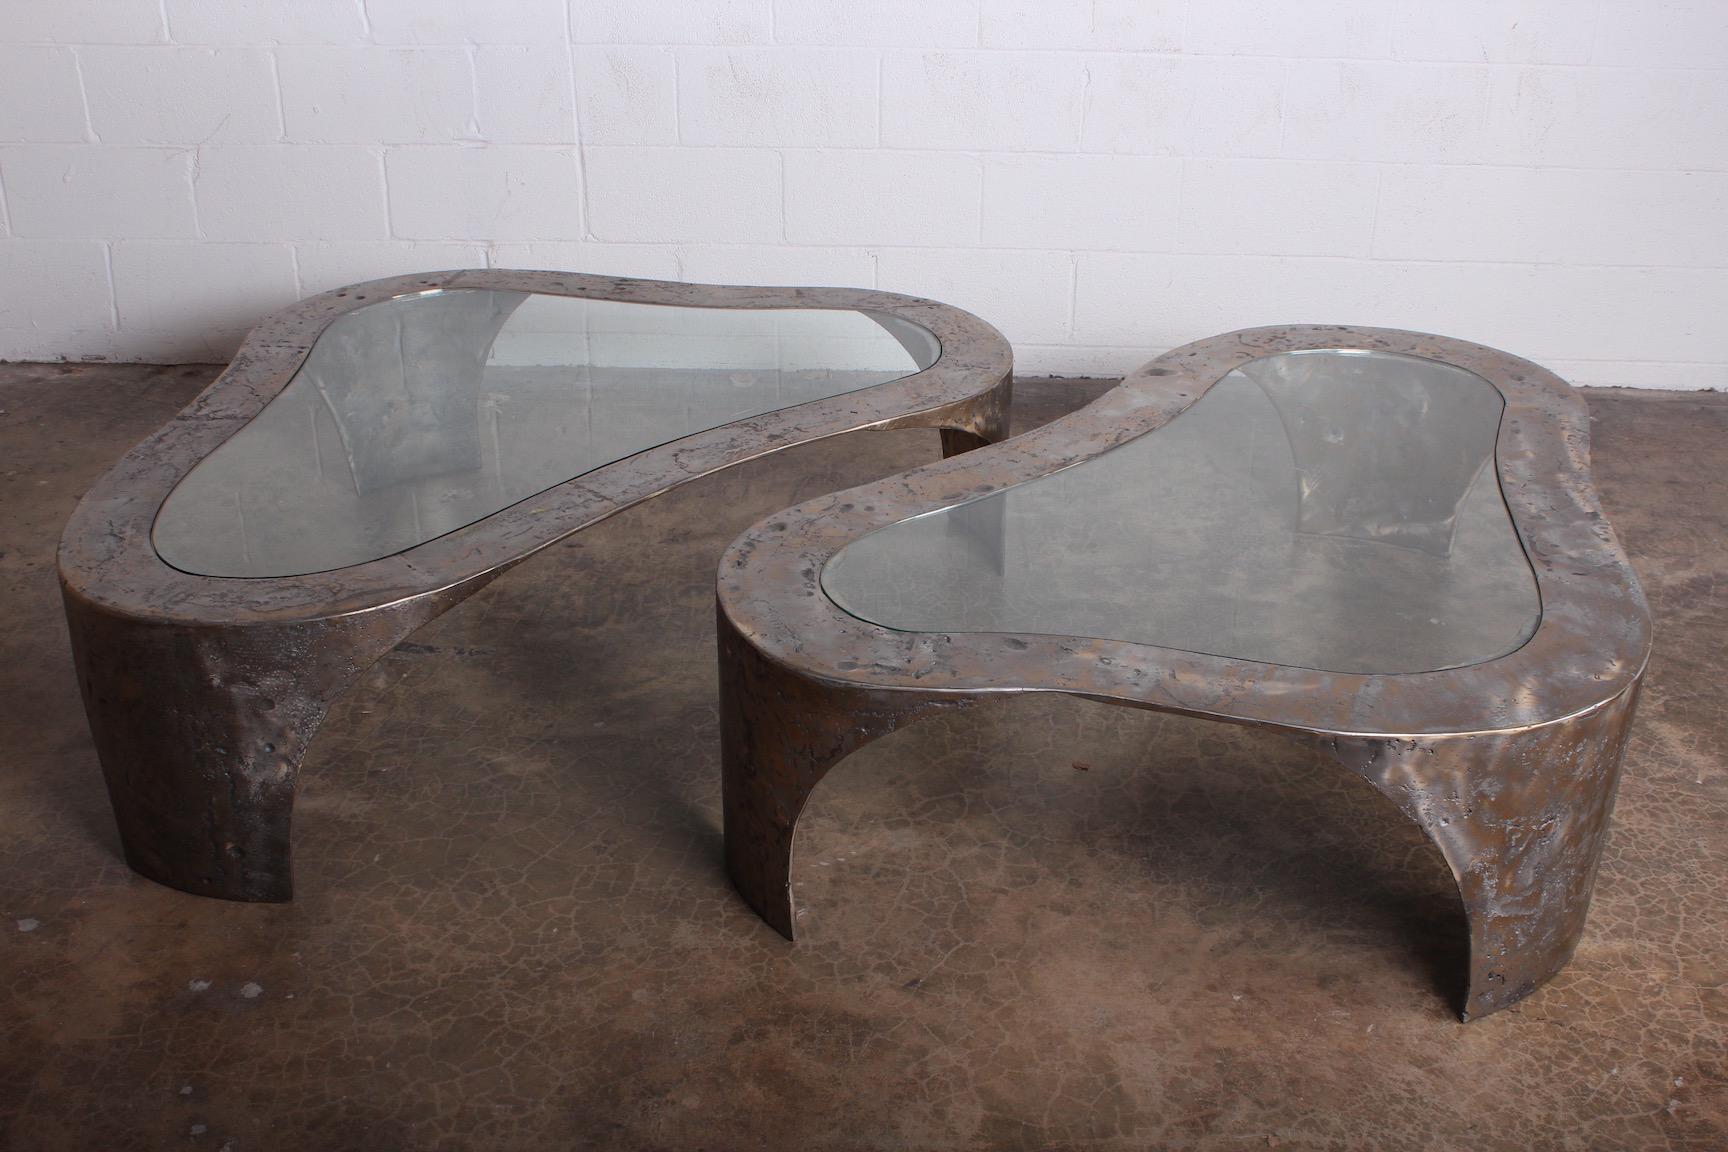 A matching pair of large scale pewter finished bronze tables with inset glass tops. Both signed by Silas Seandel.

Measures: Table one 60 x 44 x 16
Table two 59 x 40 x 16.